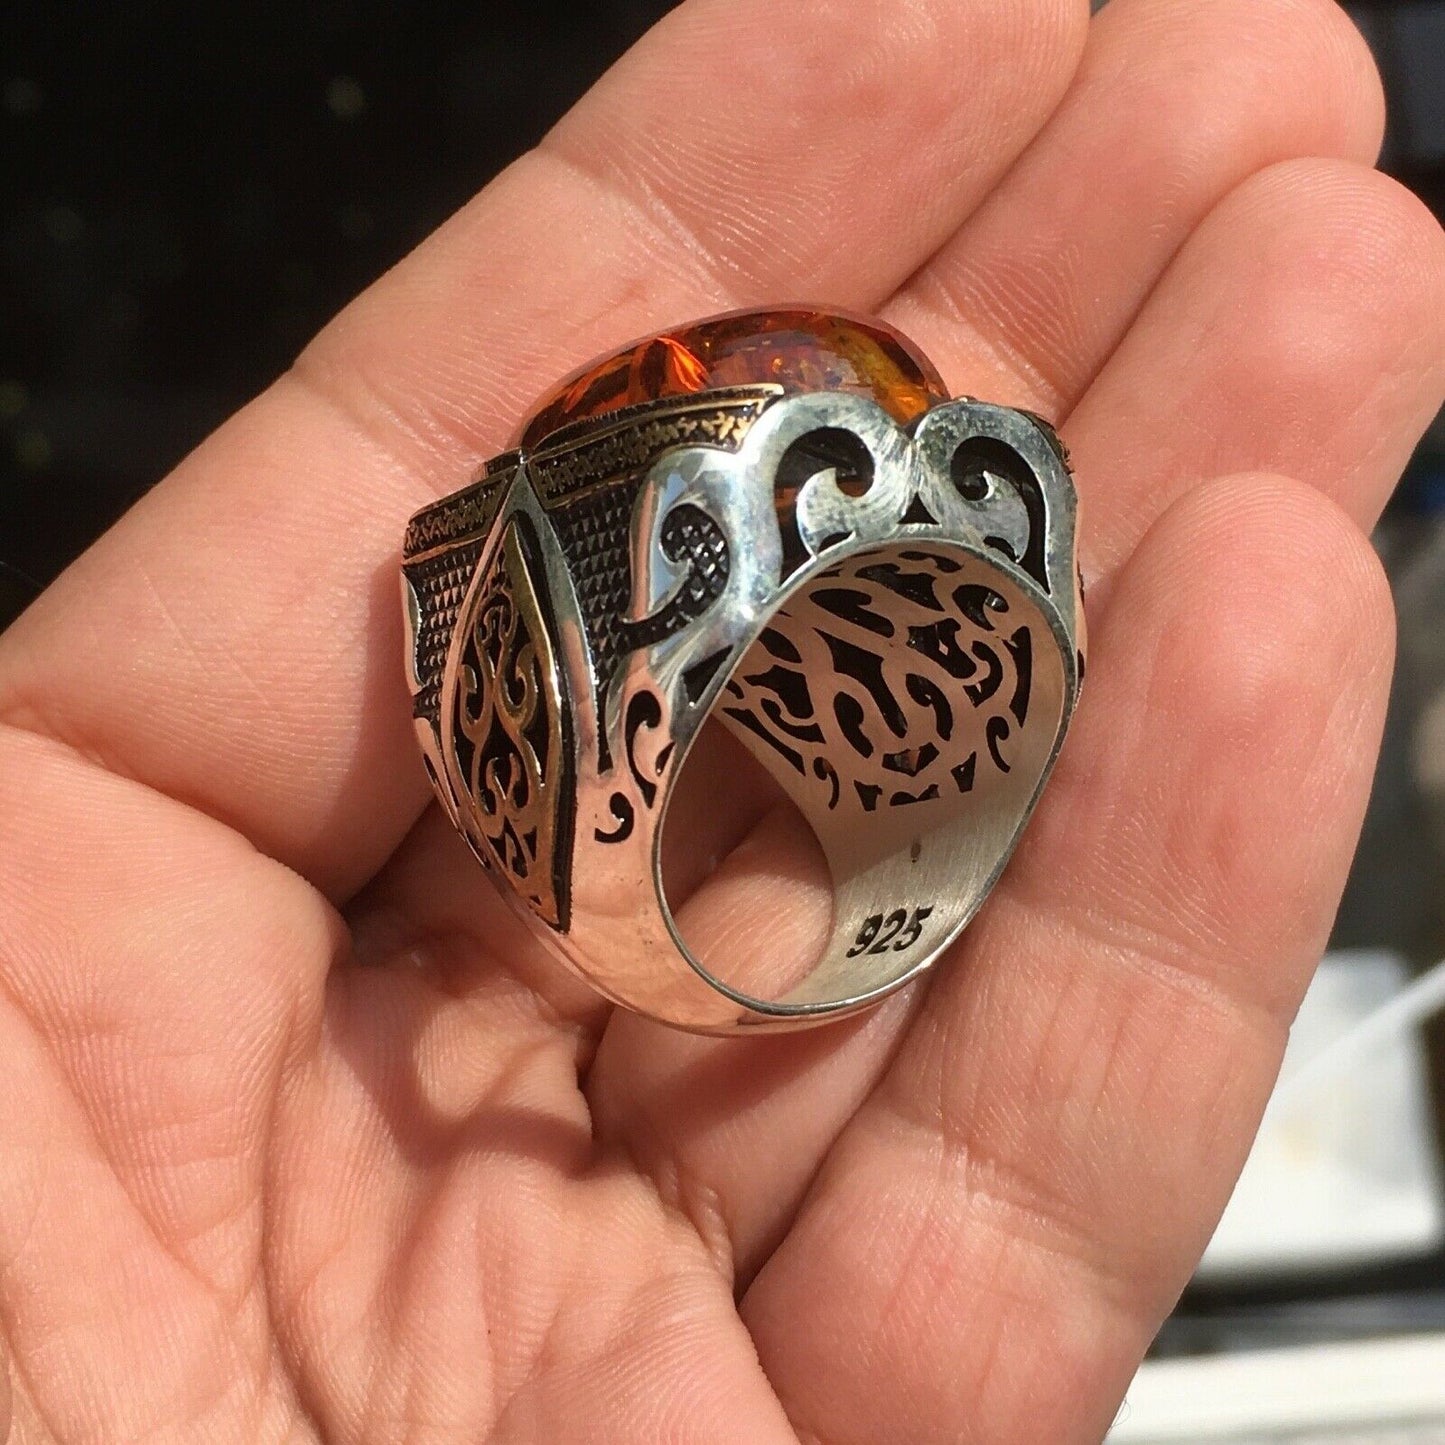 Sterling Silver Amber Men's Ring Unique Extraordinary Statement Artisan Jewelry